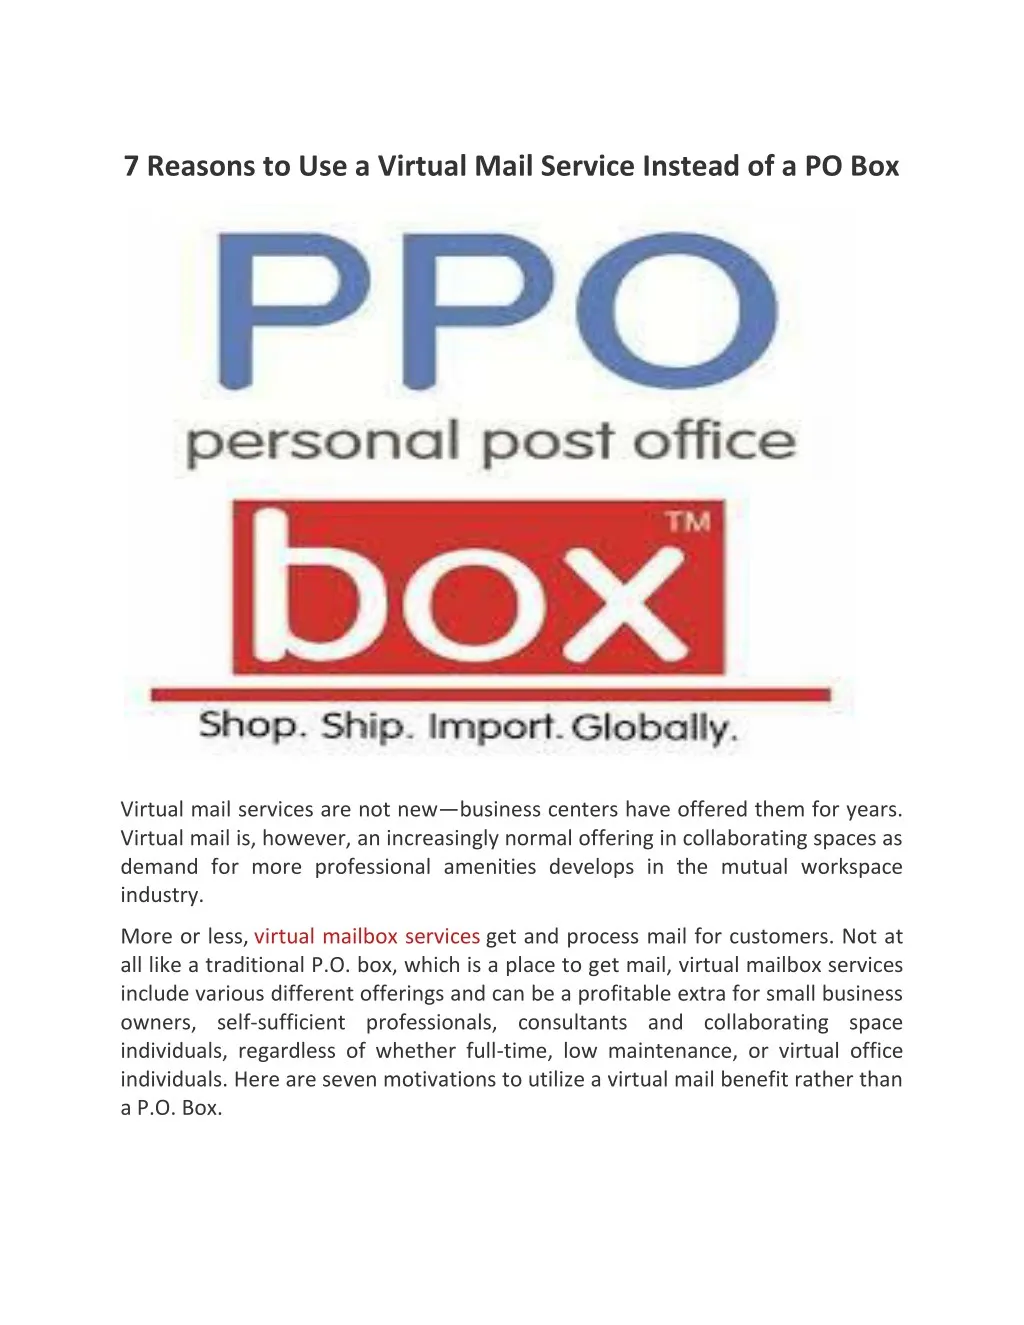 7 reasons to use a virtual mail service instead